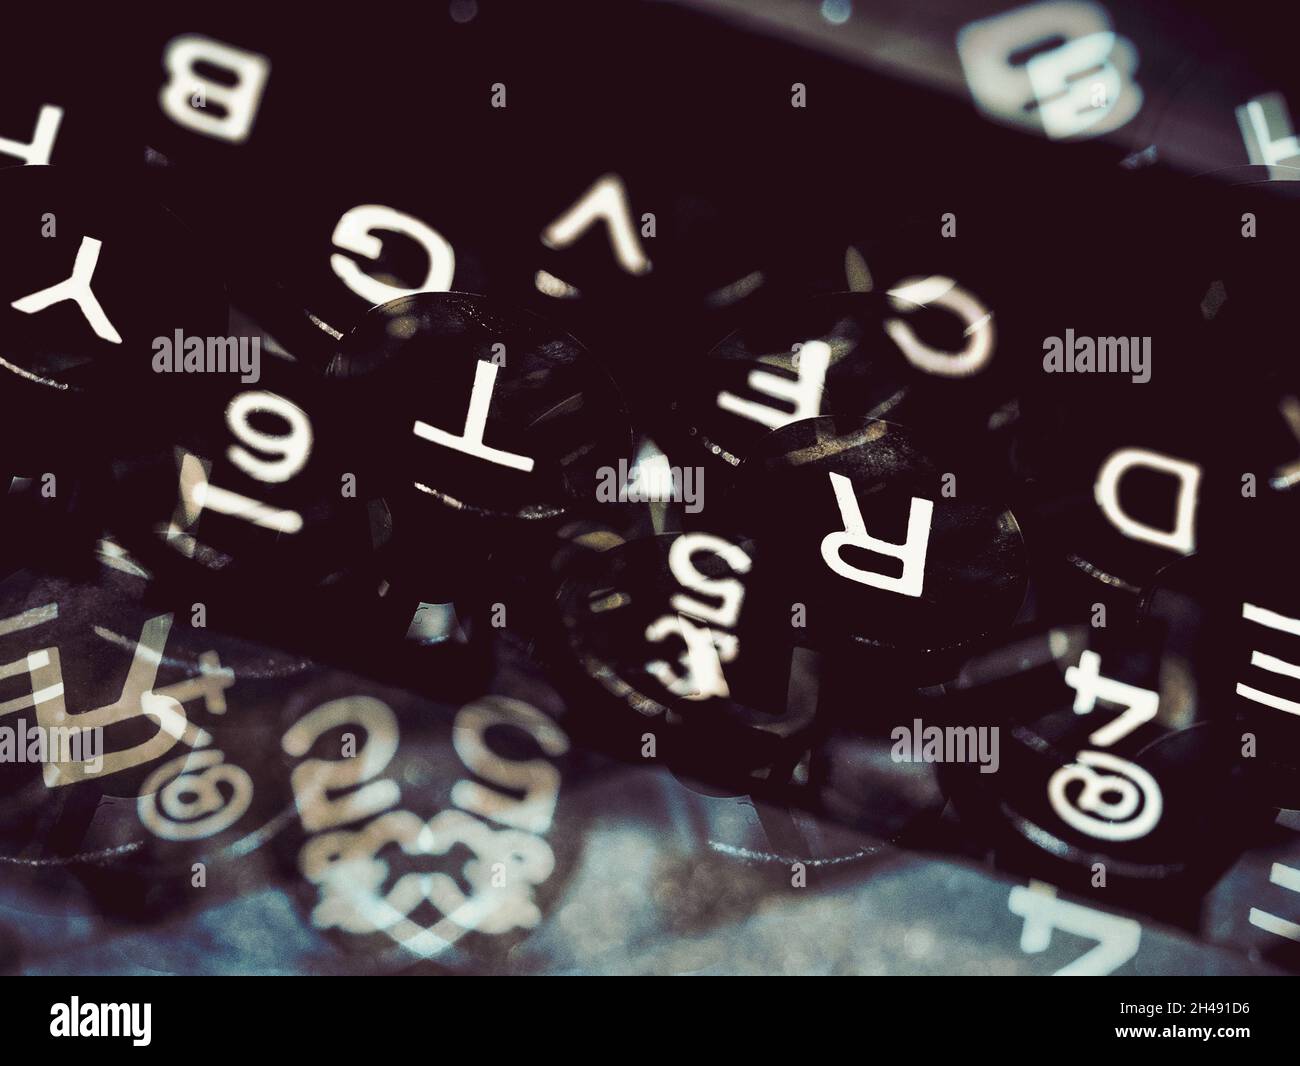 Montage of a Typewriter keyboard with overlapping images in a cross processed tone Stock Photo